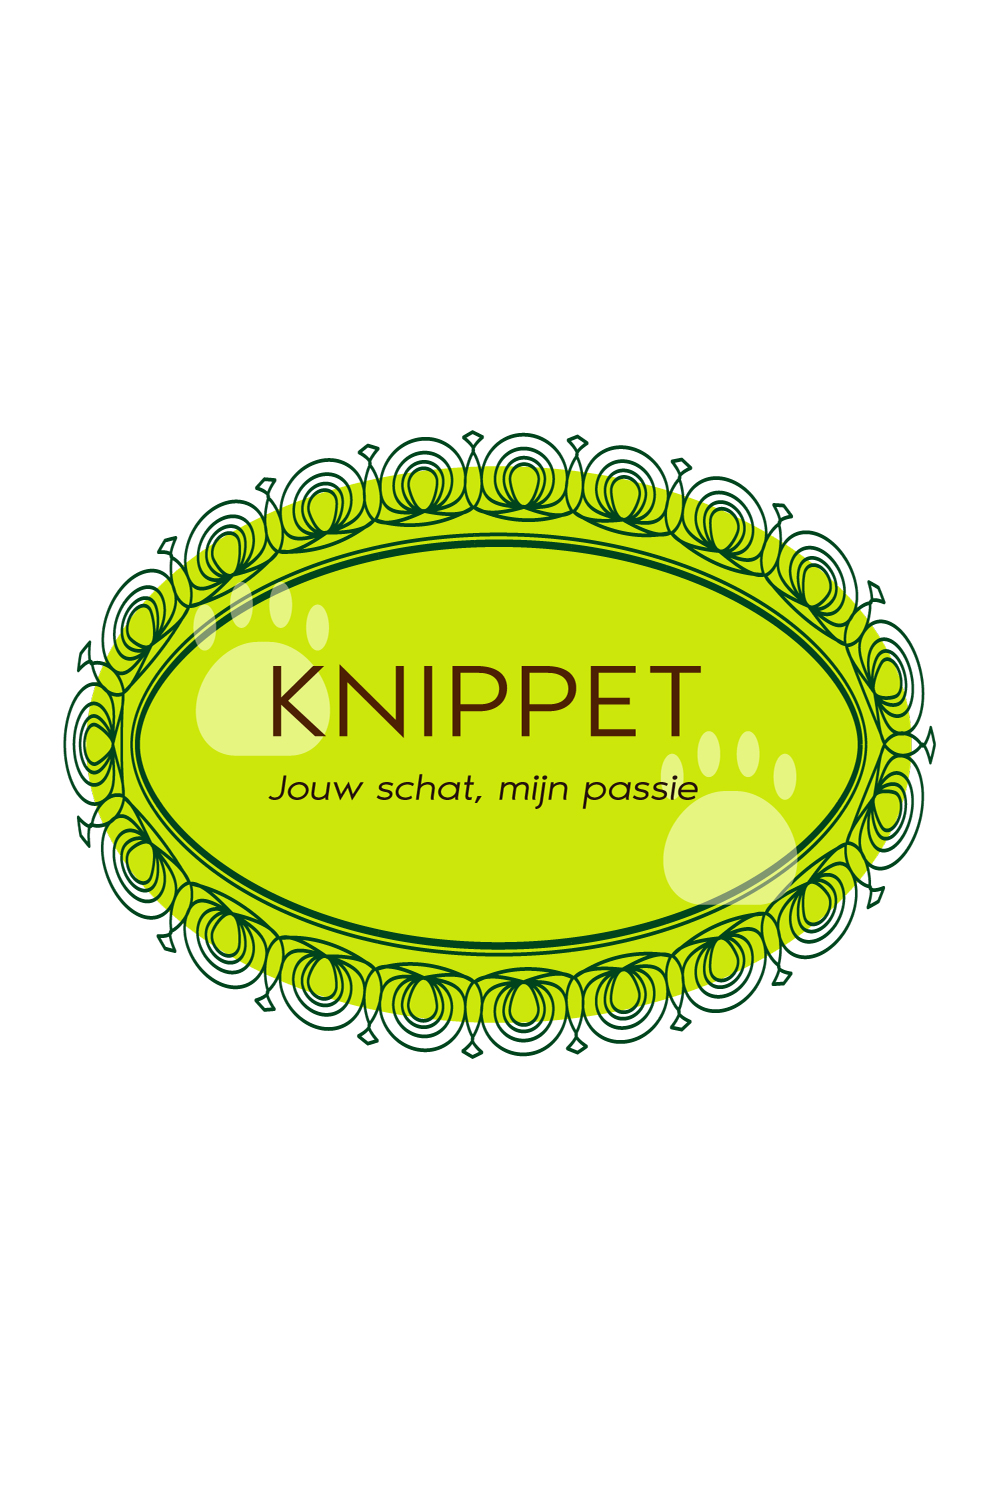 knippet - TShirt Print Design pinterest preview image.